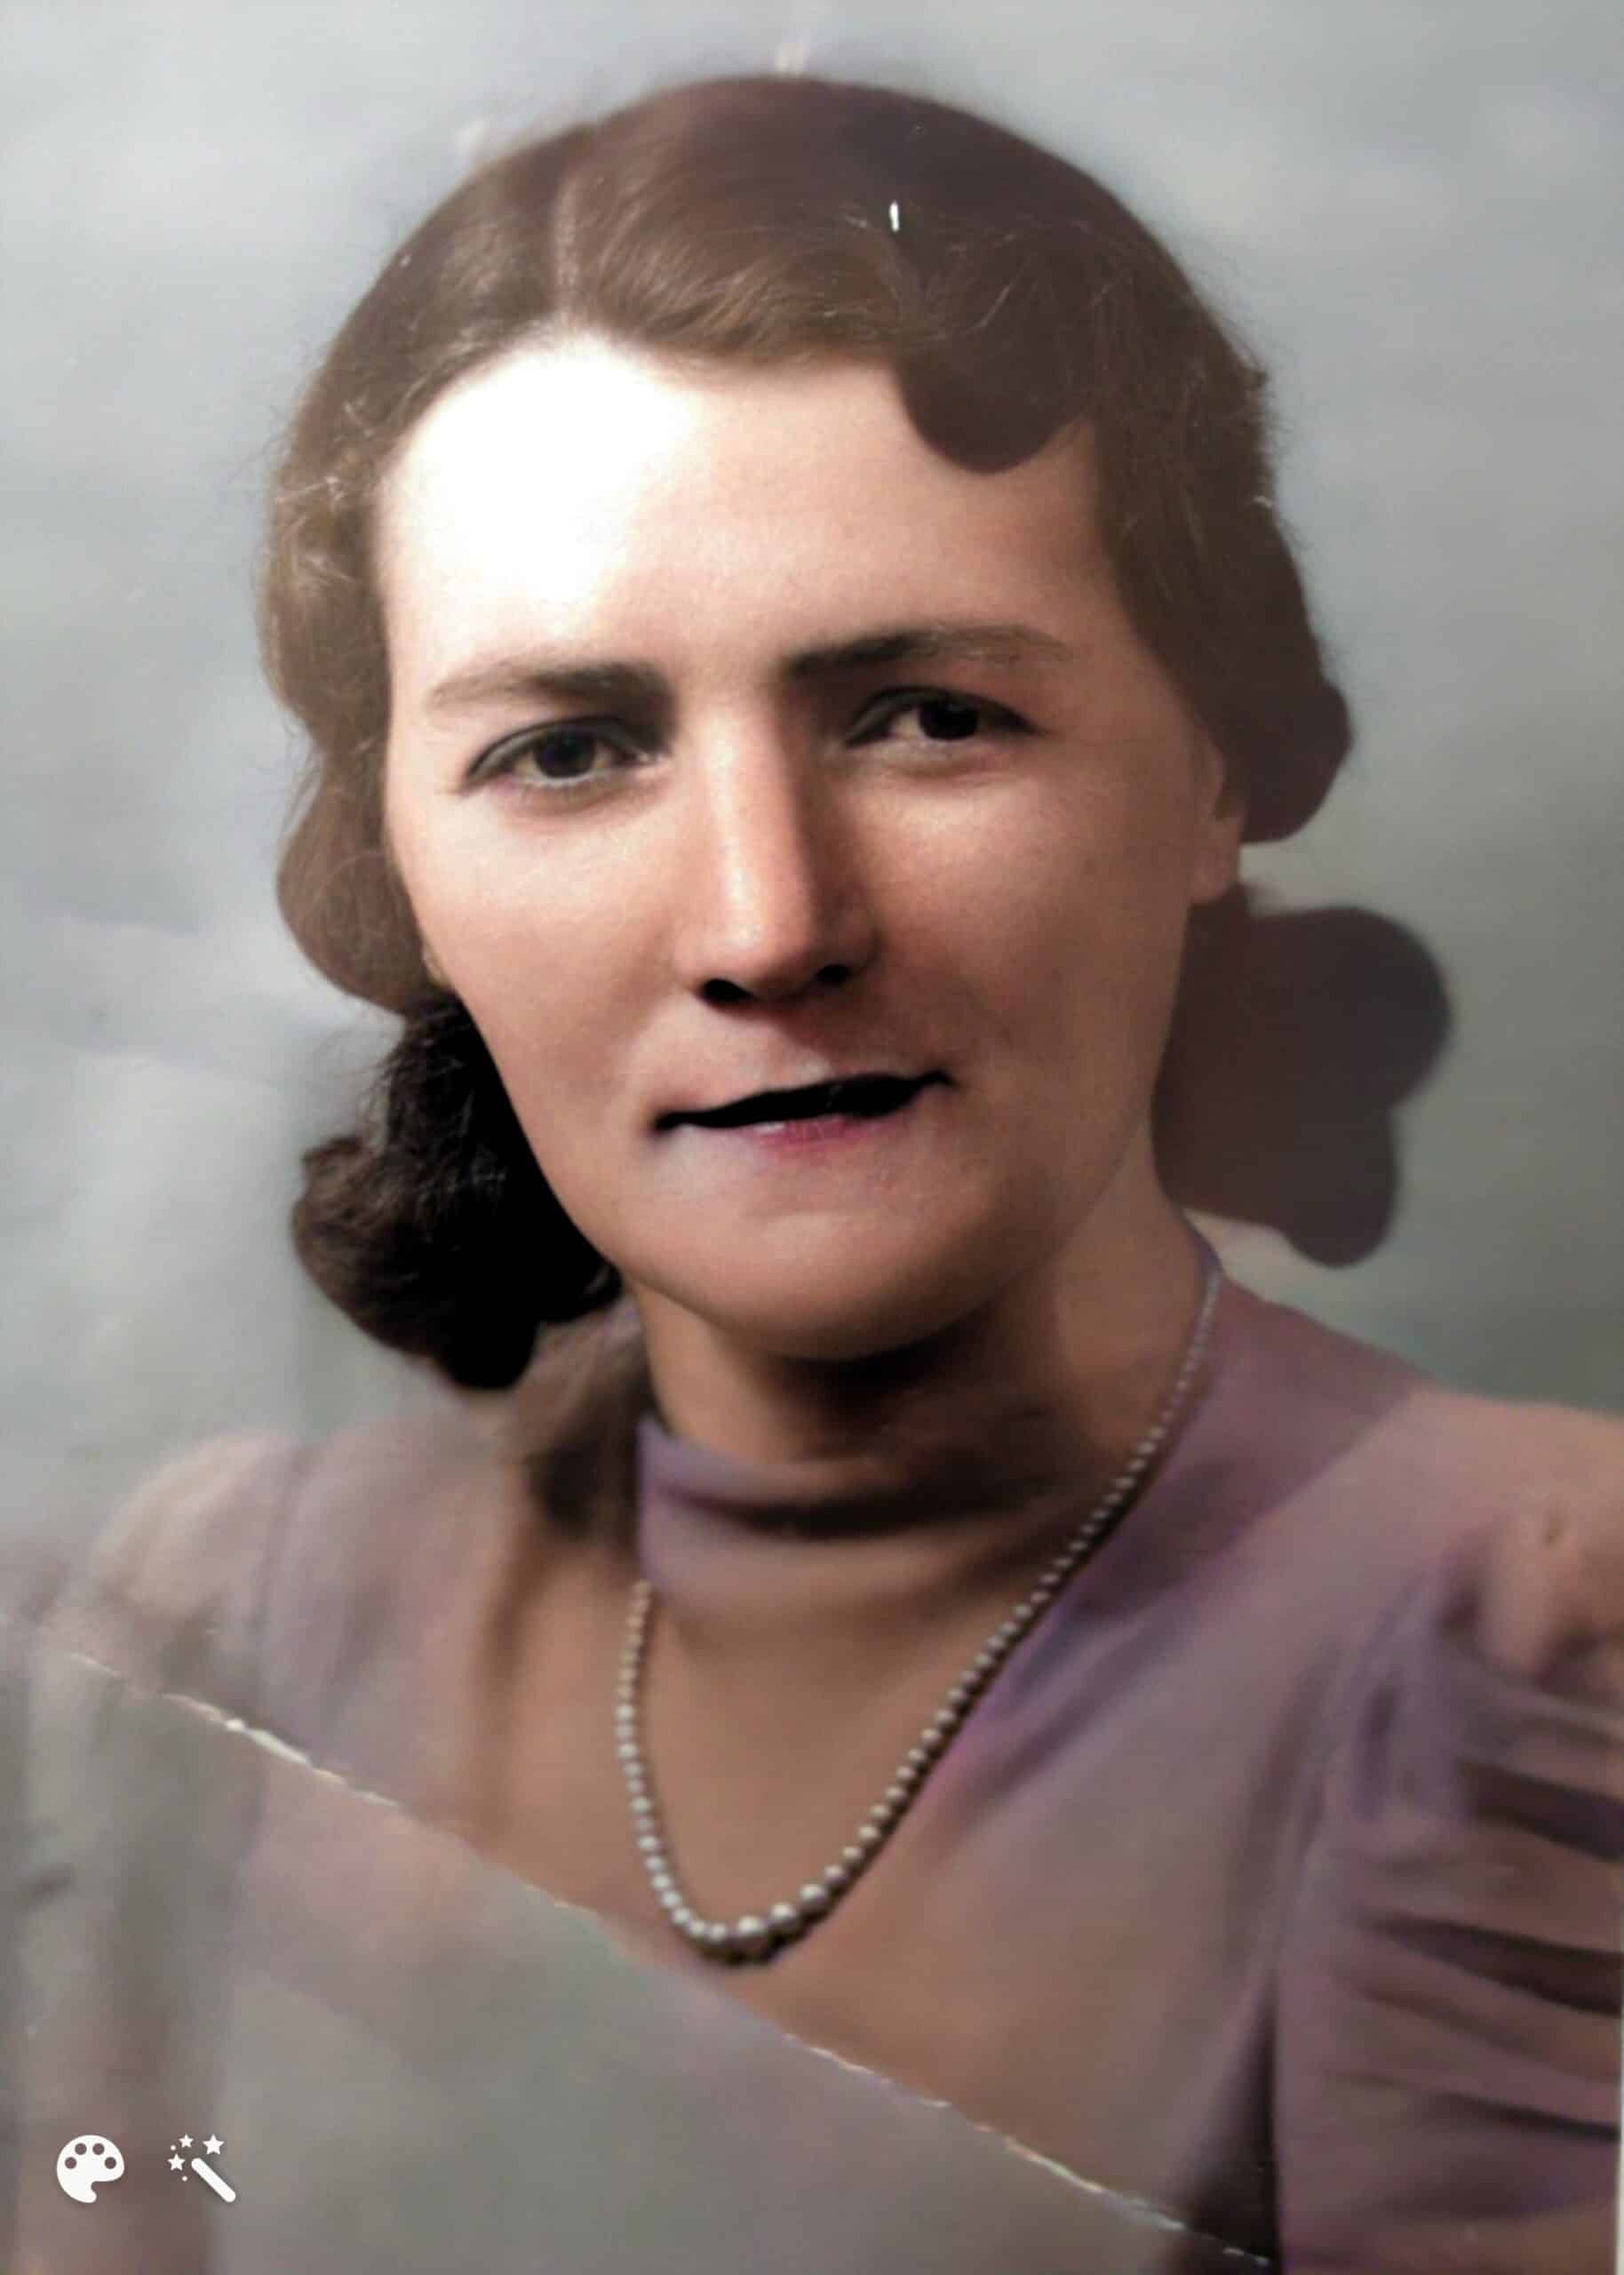 Peter's grandmother, Elsie. Photo colorized and enhanced by MyHeritage